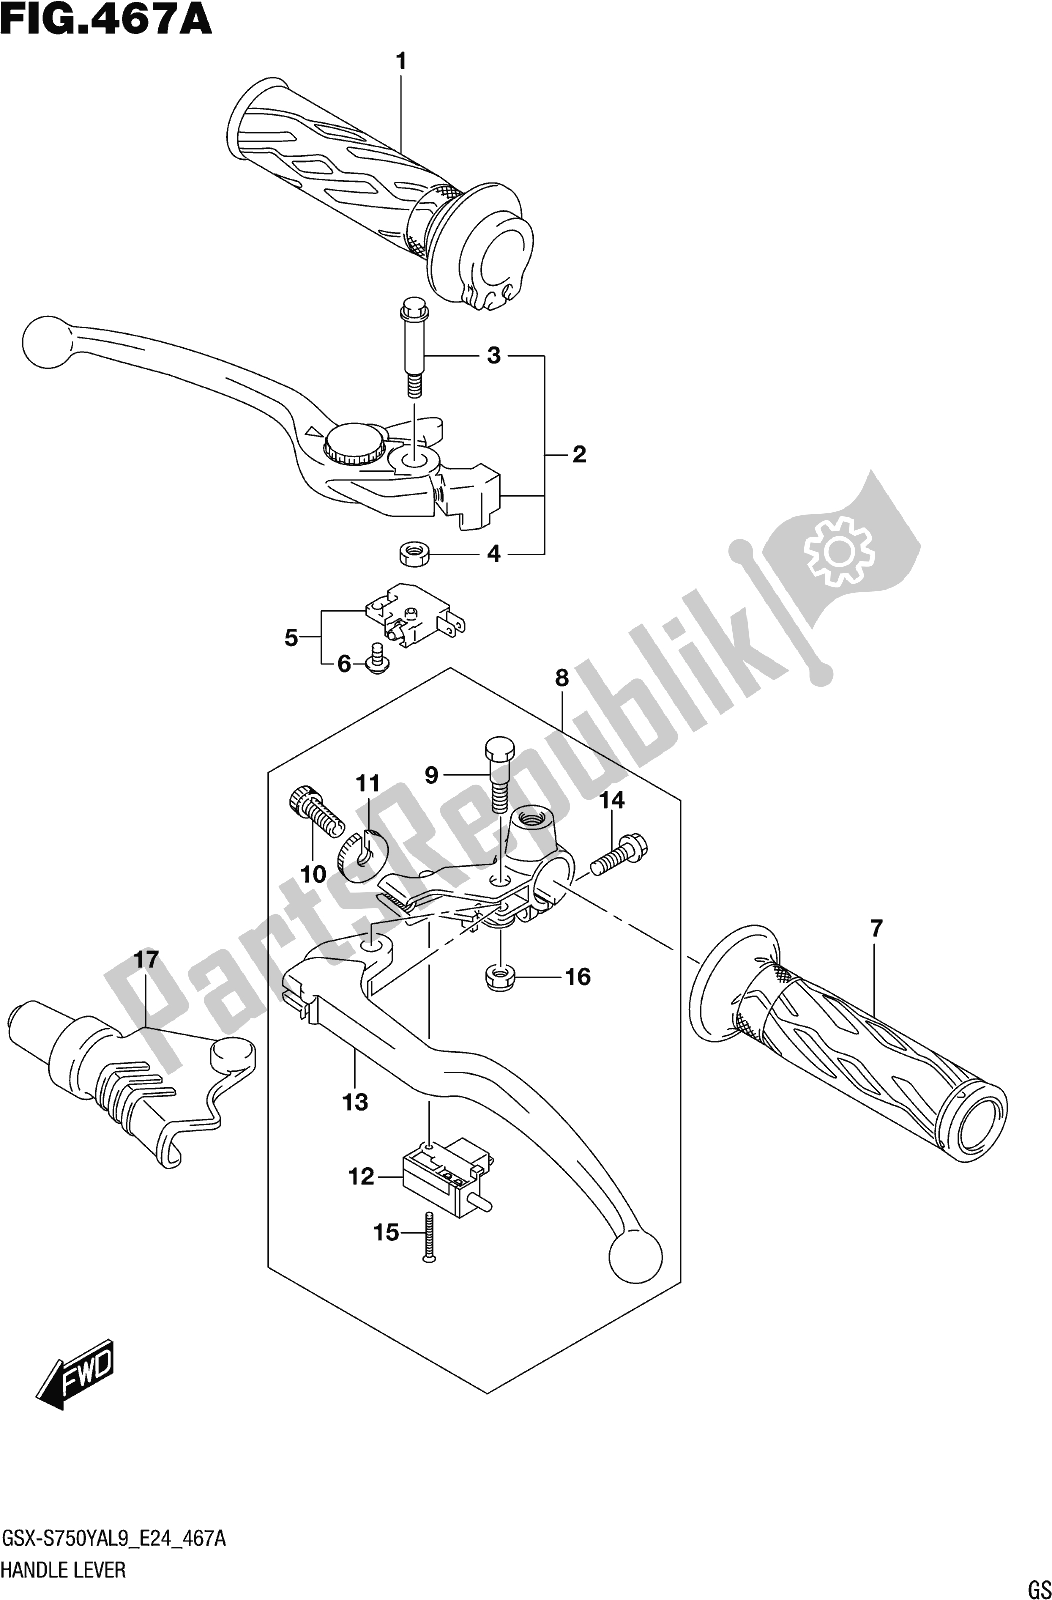 All parts for the Fig. 467a Handle Lever of the Suzuki Gsx-s 750 ZA 2019